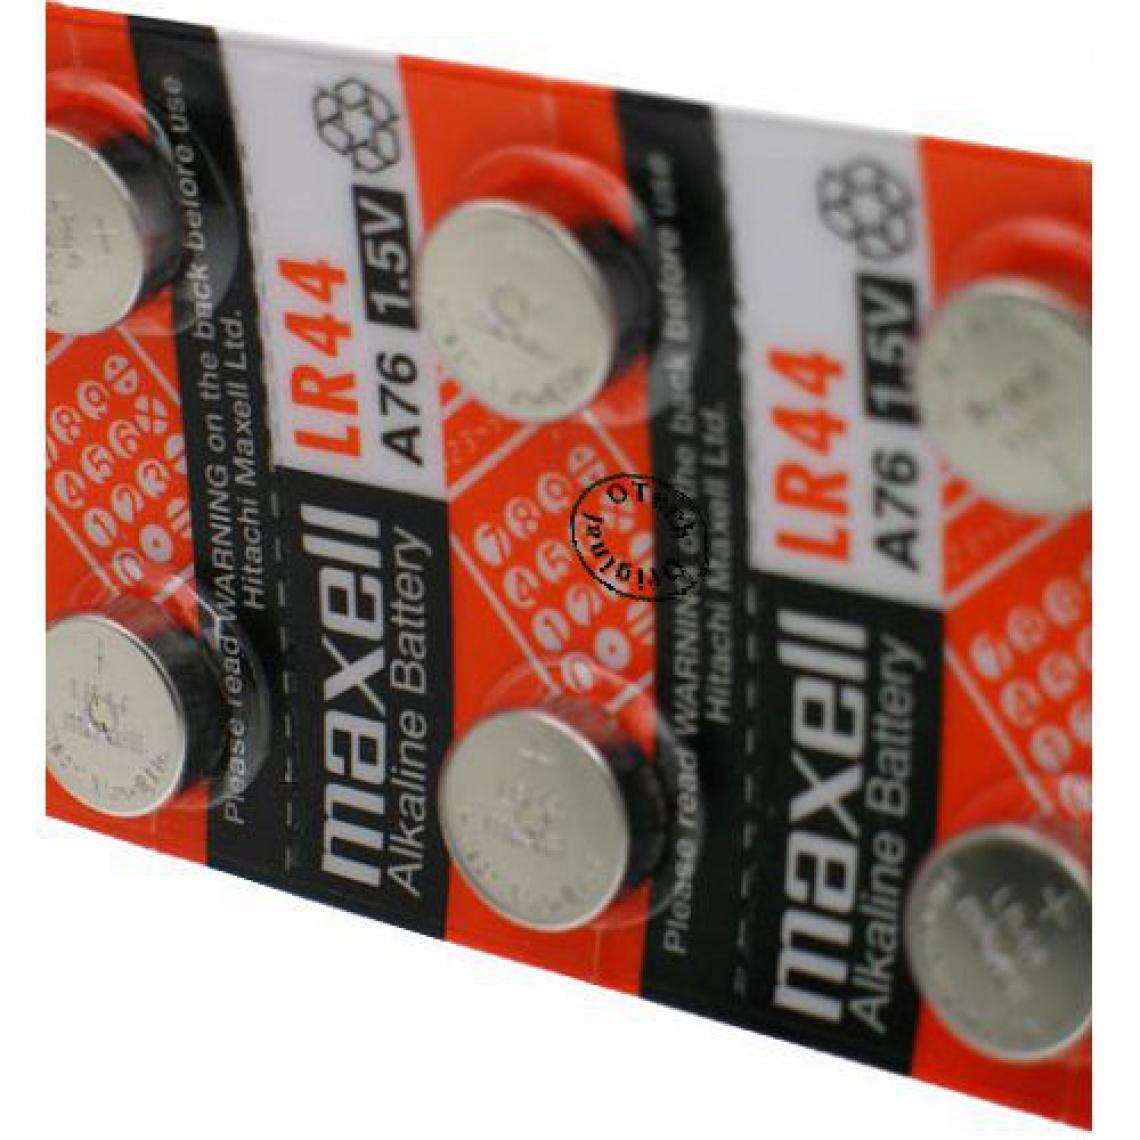 Otech - Pack de 10 piles maxell pour MAXELL GPA75 - Piles rechargeables